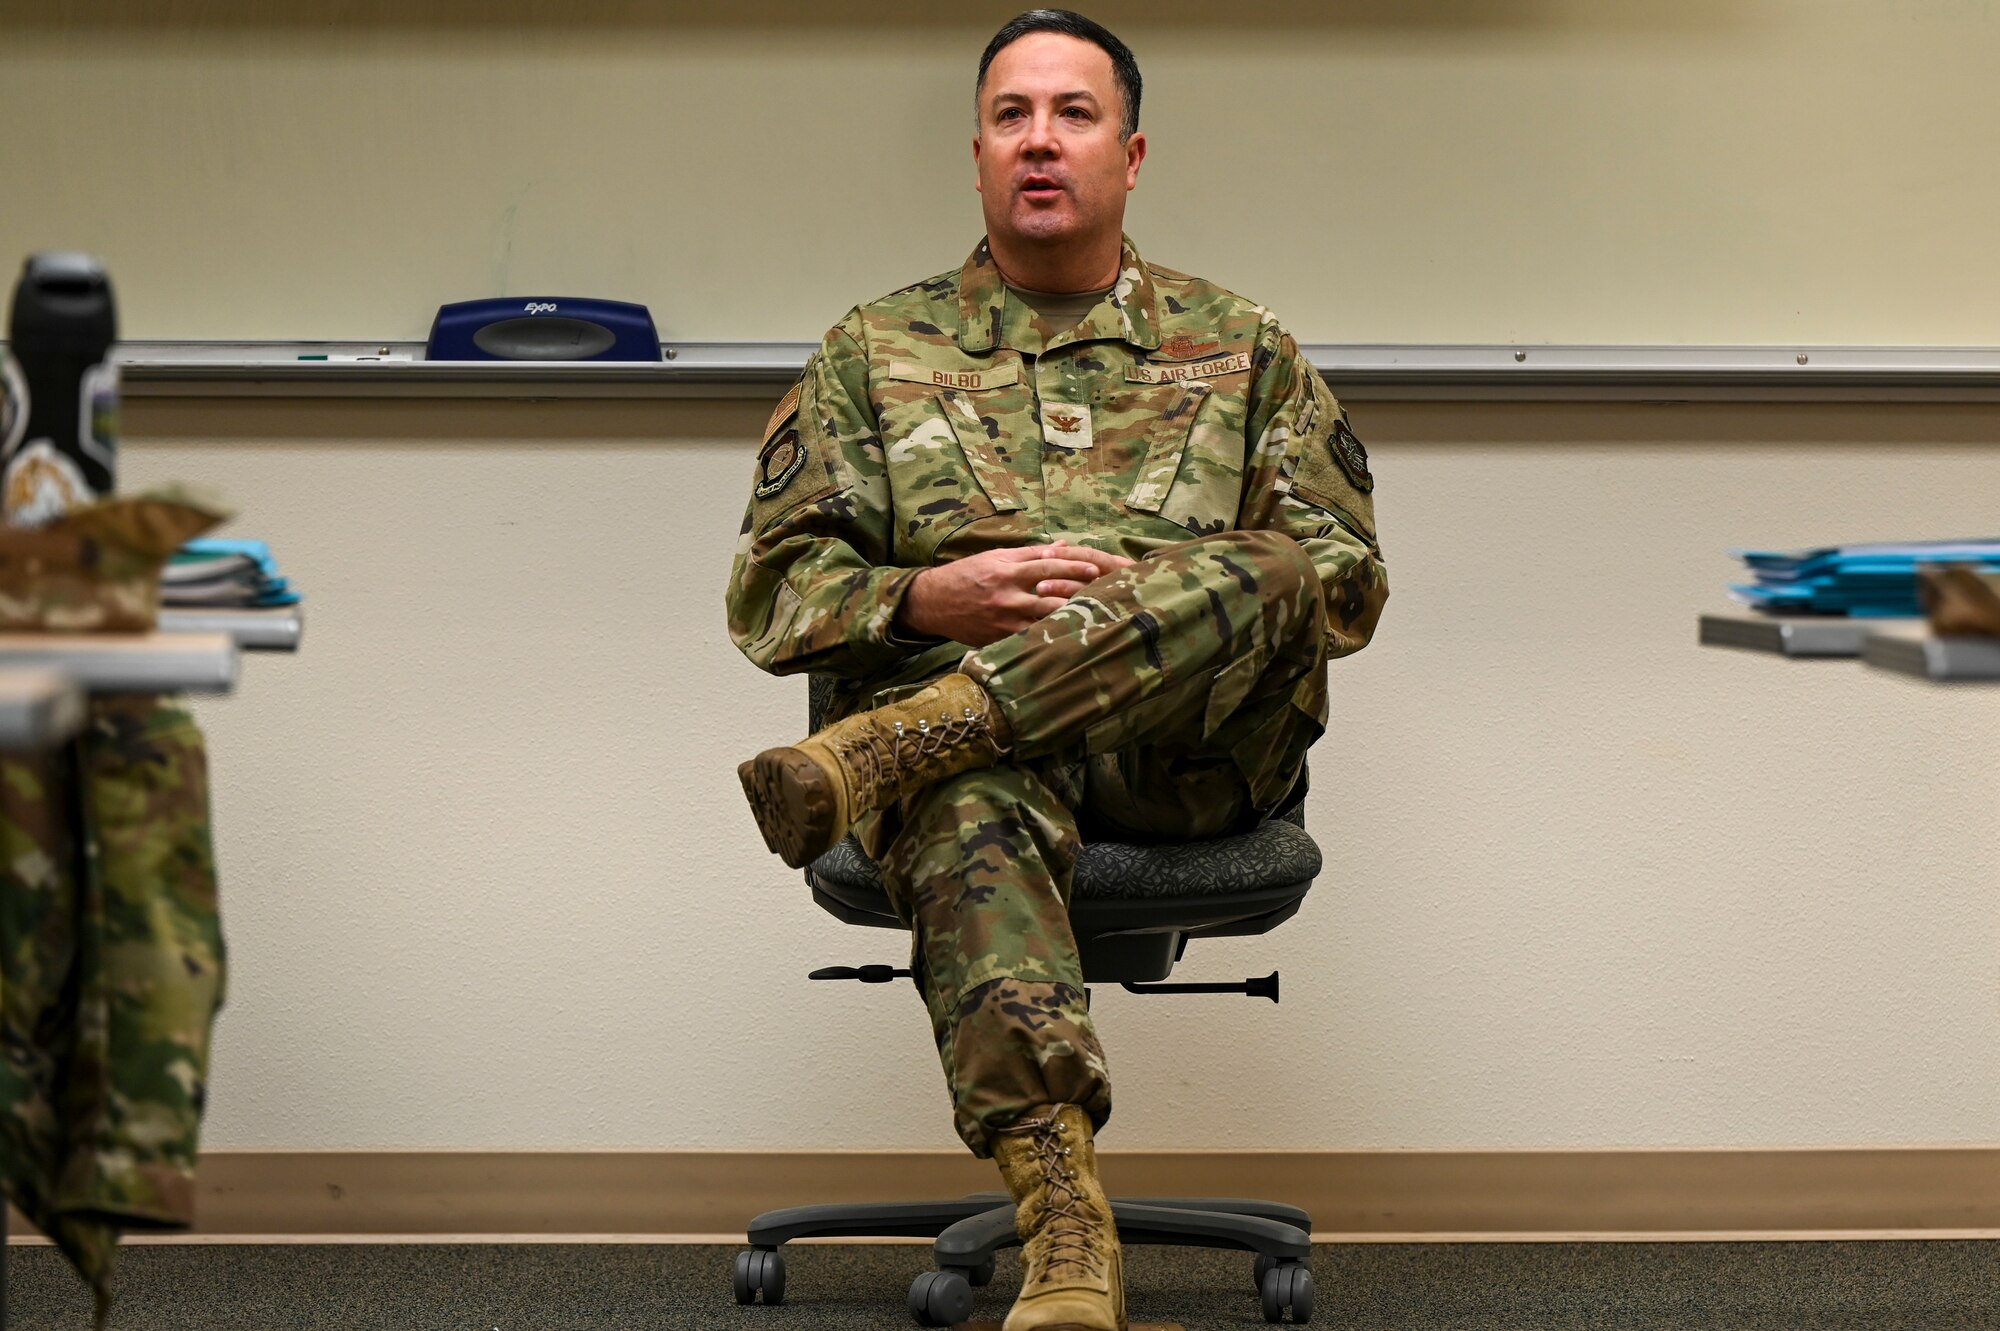 Air Force Colonel sitting in a chair